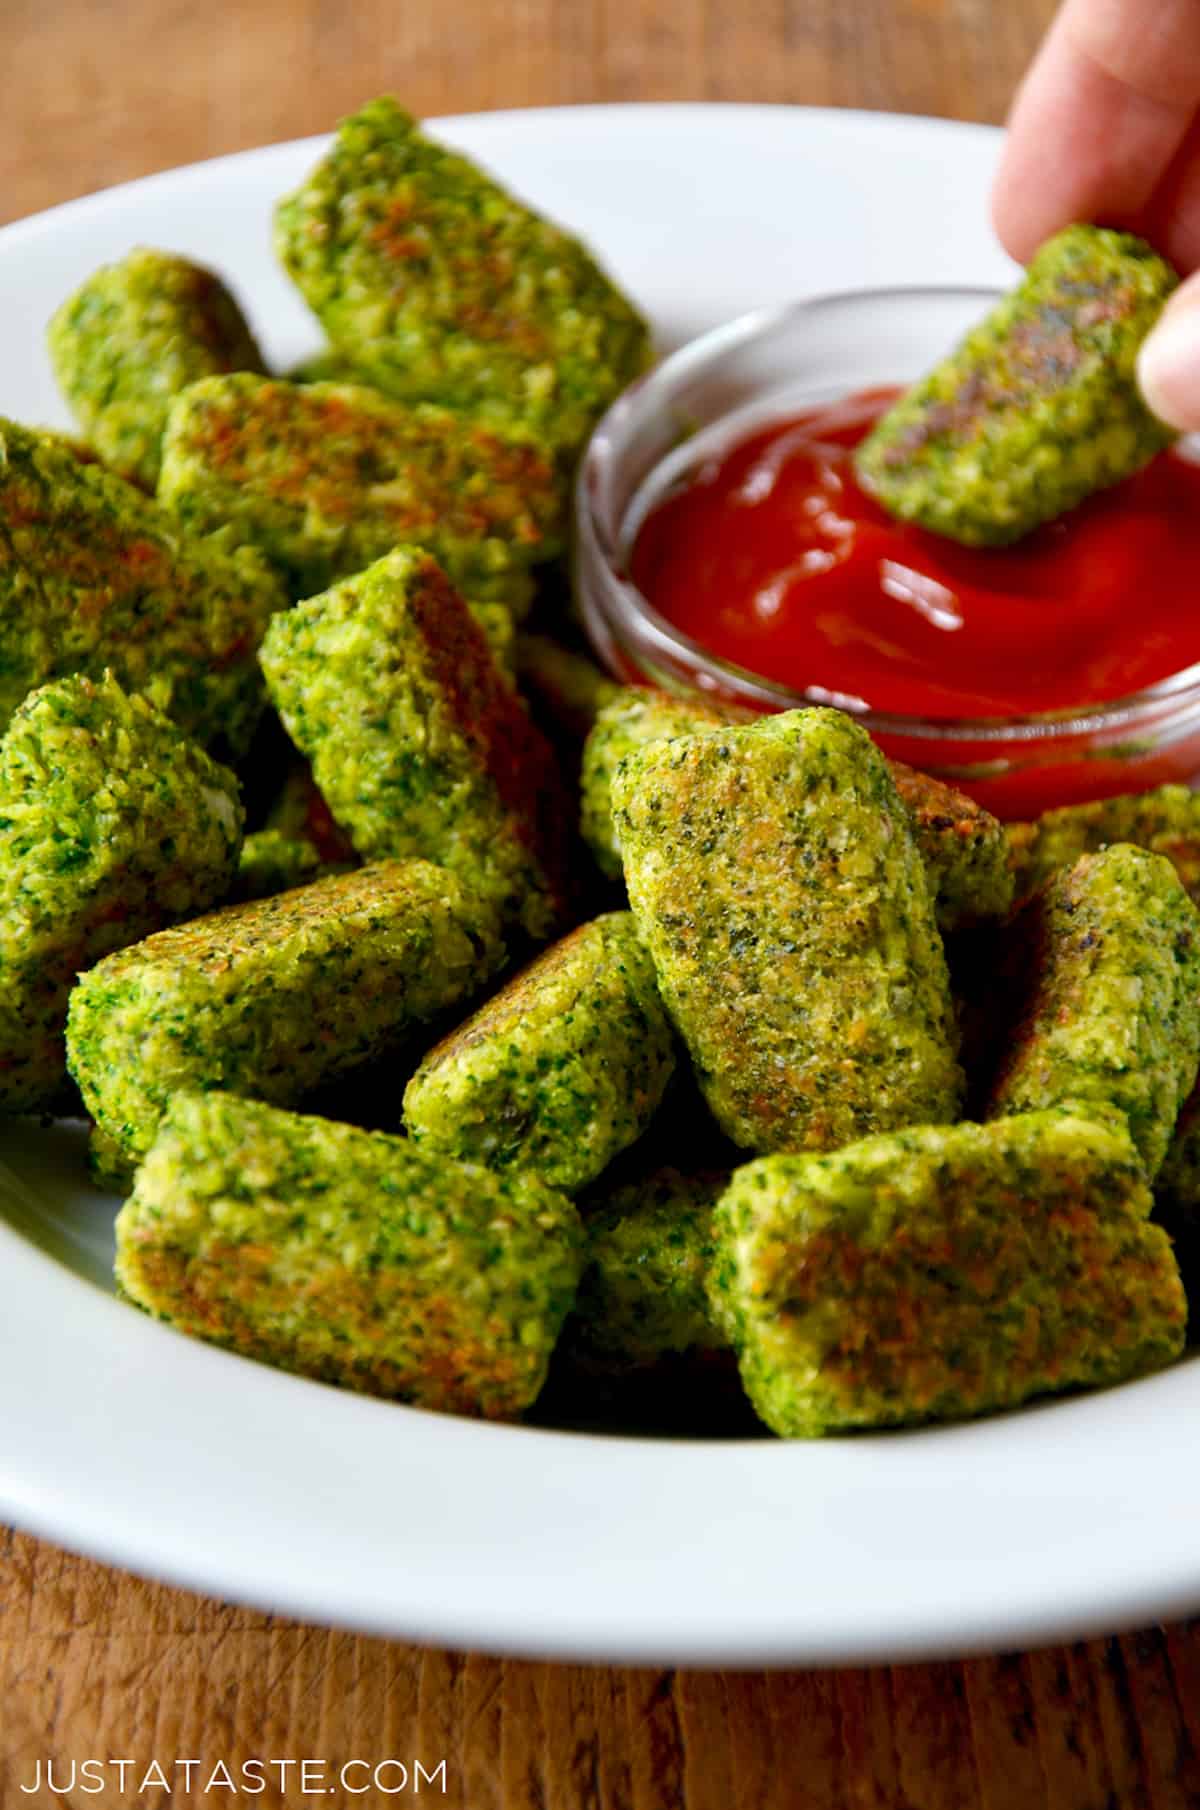 A platter of broccoli tots and a person dipping a baked broccoli tot into a small bowl of ketchup.